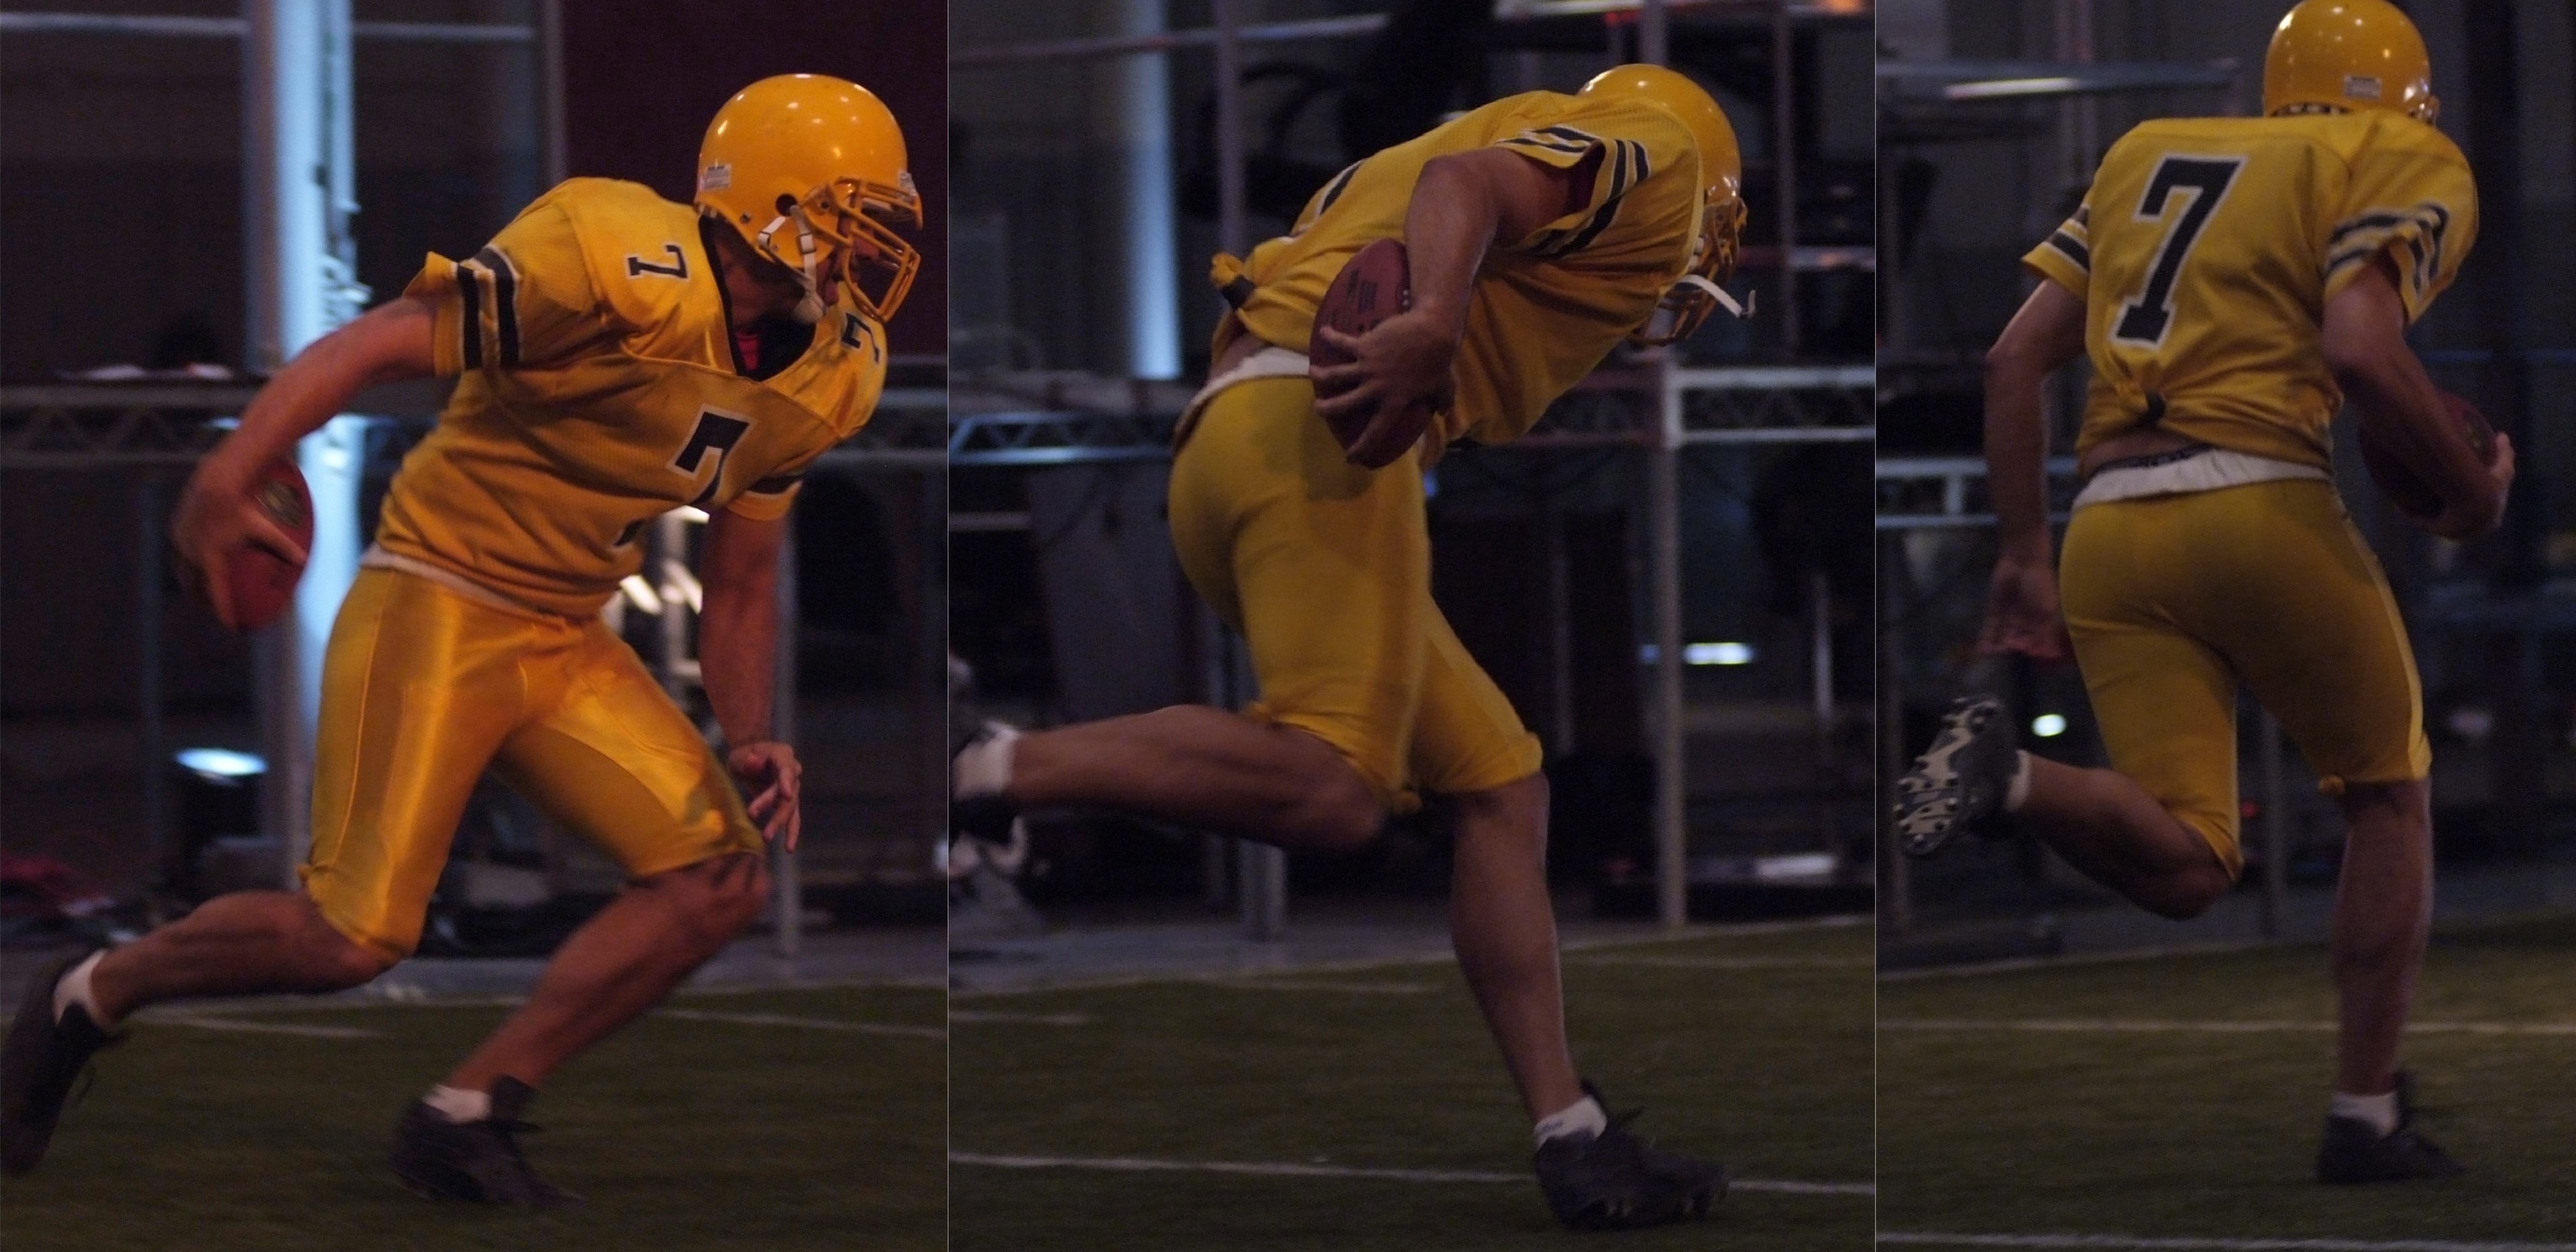 Humphries on the set of Sport Science. Writer, Producer & Athlete. Catching a pass from Ben Roethlisberger.